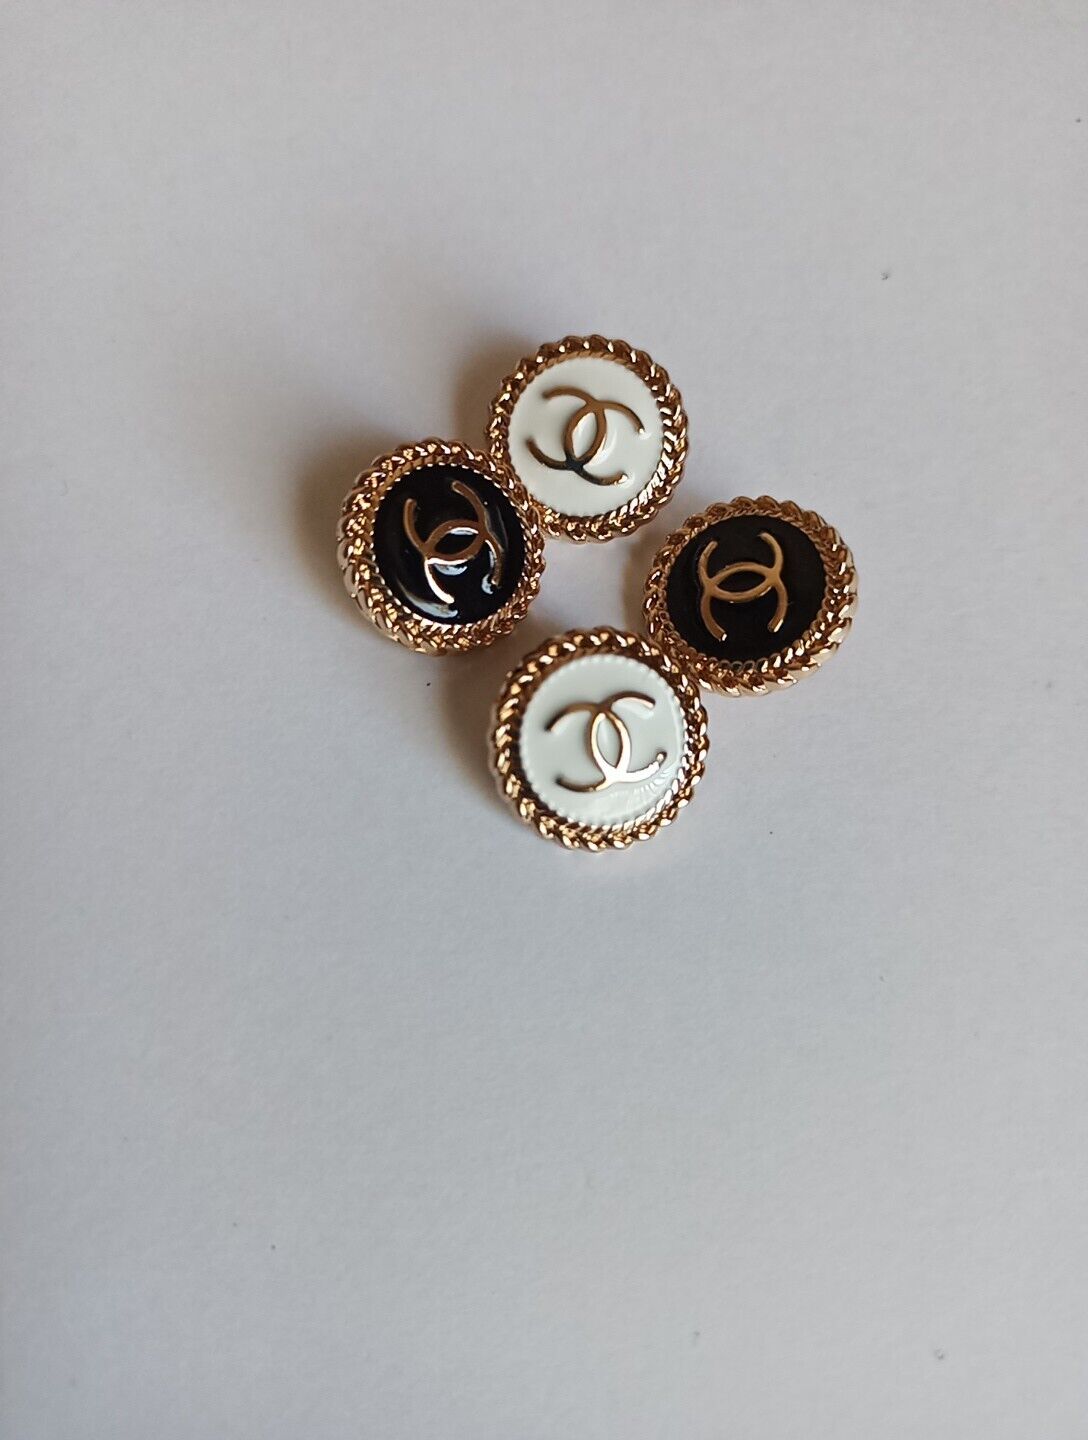 Lot Of 4 16mm Cc Button REPLACEMENT Gold Tone Chanel BUTTON